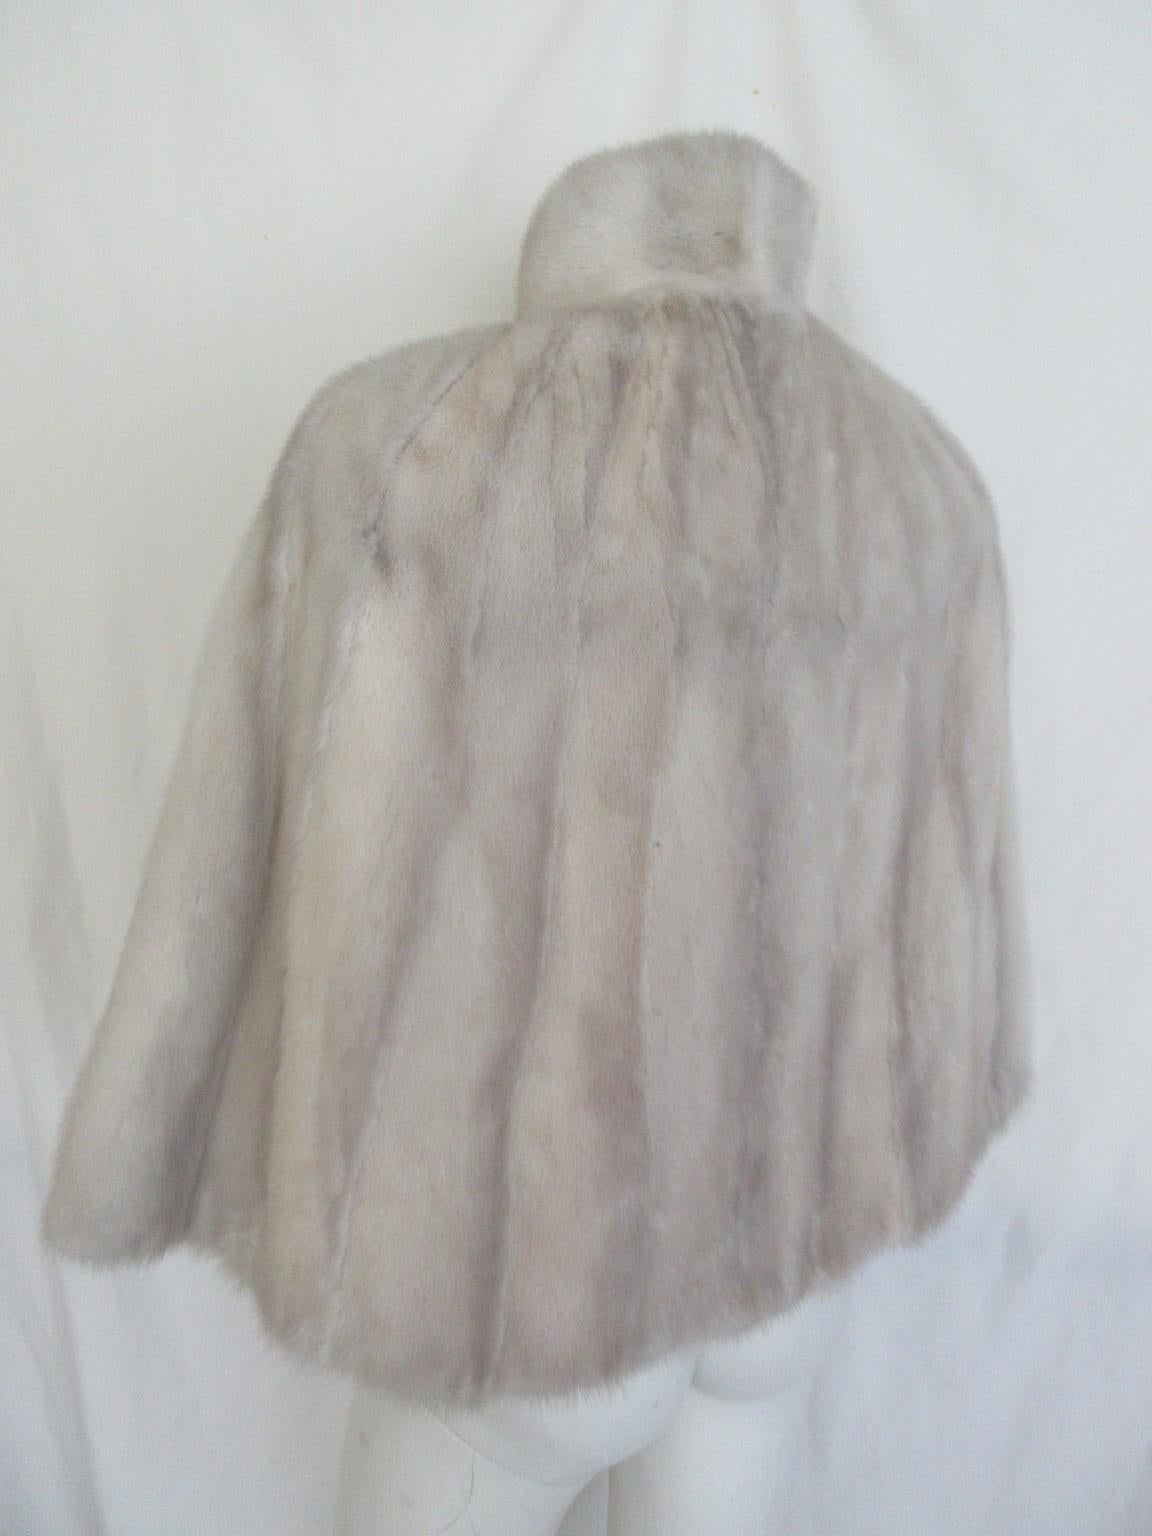 Beautiful vintage stole cape made of mink fur .Nice to wear for marriage, party or on jeans.

We offer more luxury fur products, view our frontstore.

Details:
Silk lined with an inside pocket and 2 inside handles for arms
With 2 closing hooks, or